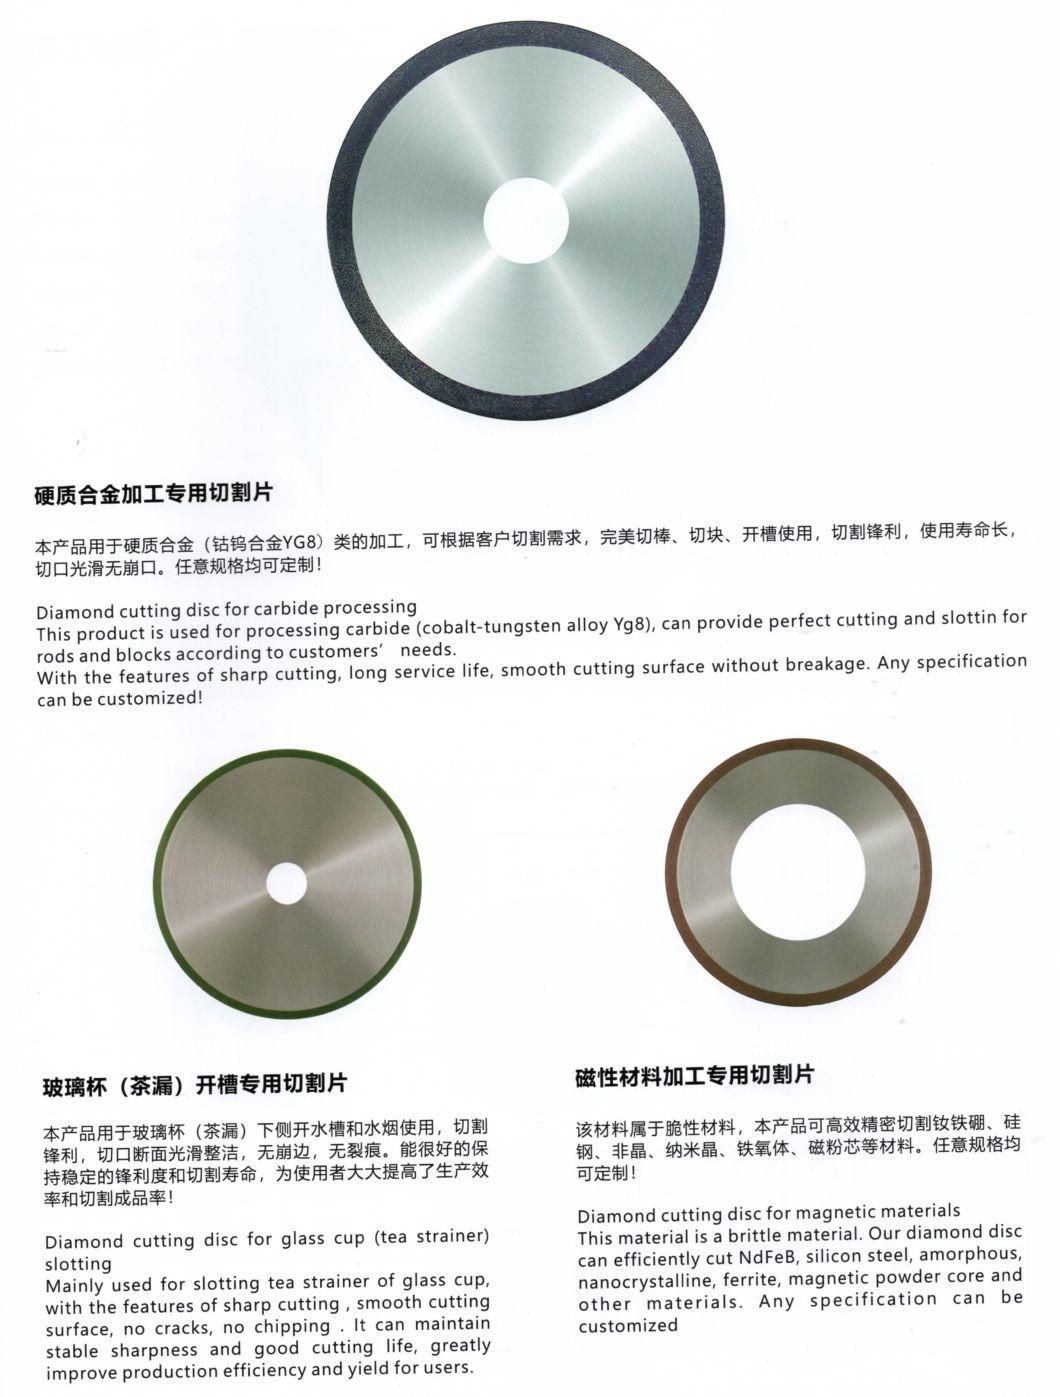 Metal Bonded Diamond Cutting Disc for Optical Glass